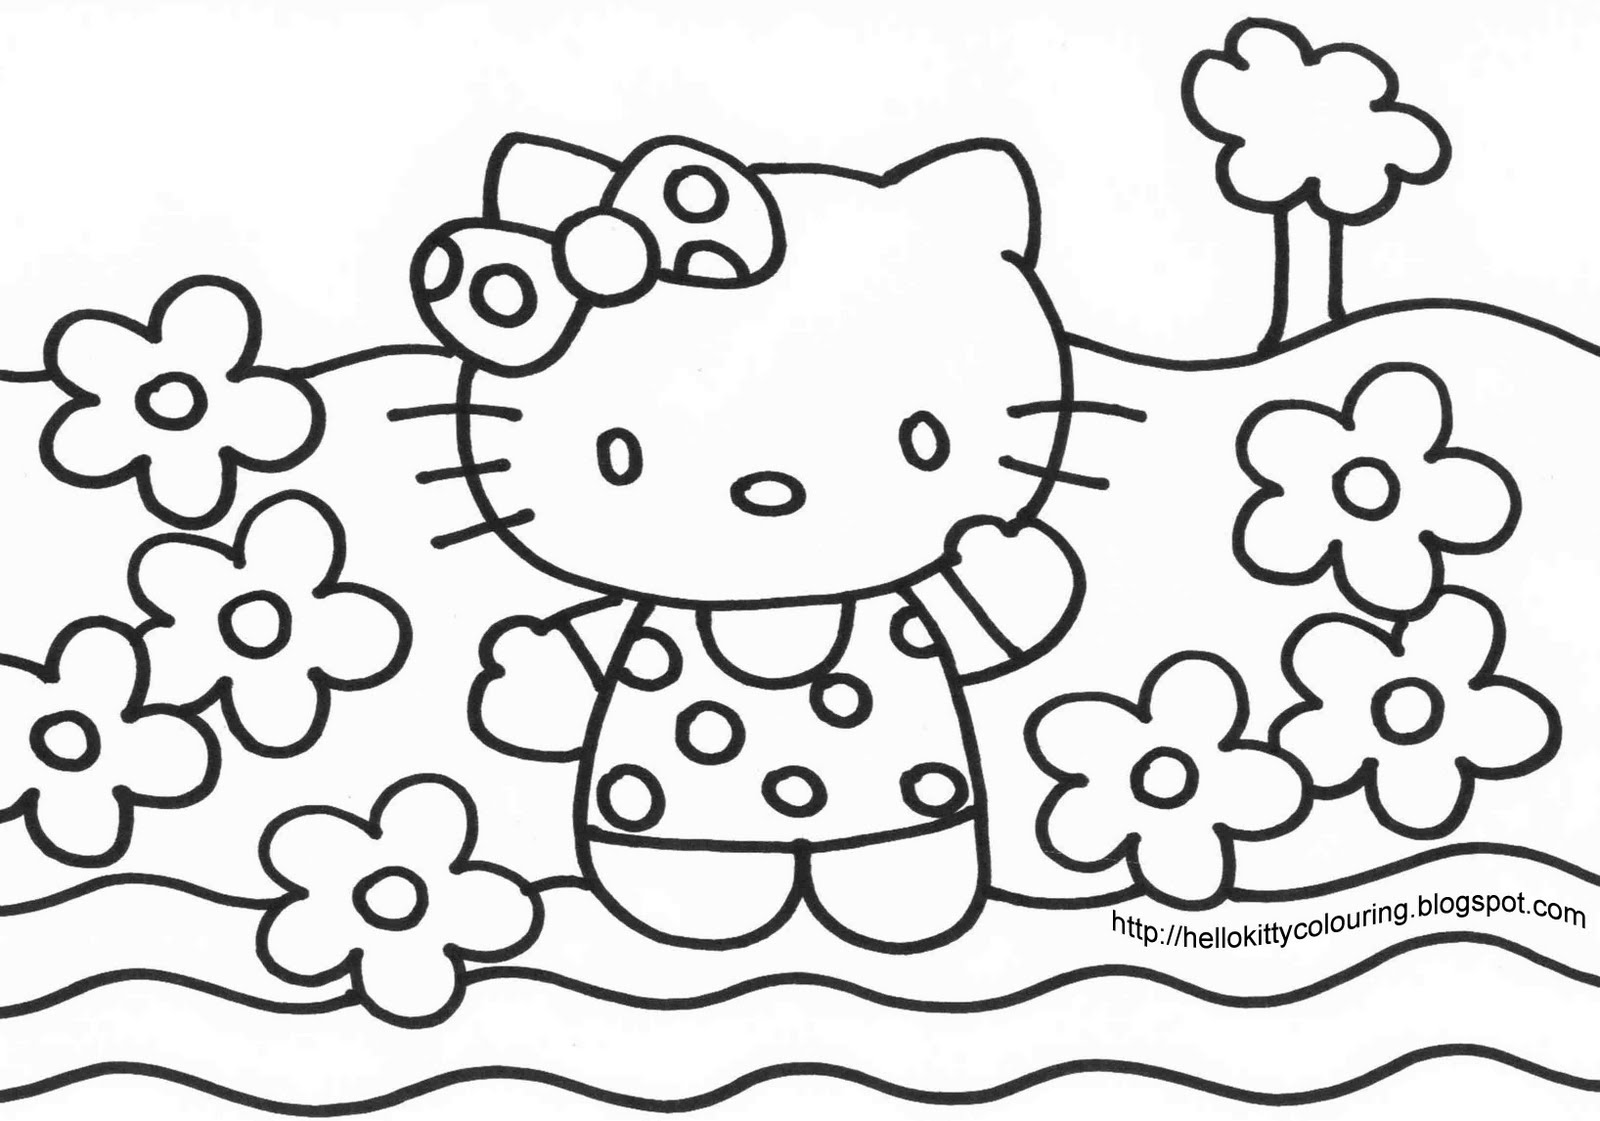 Download HELLO KITTY AT THE BEACH COLOURING PAGE